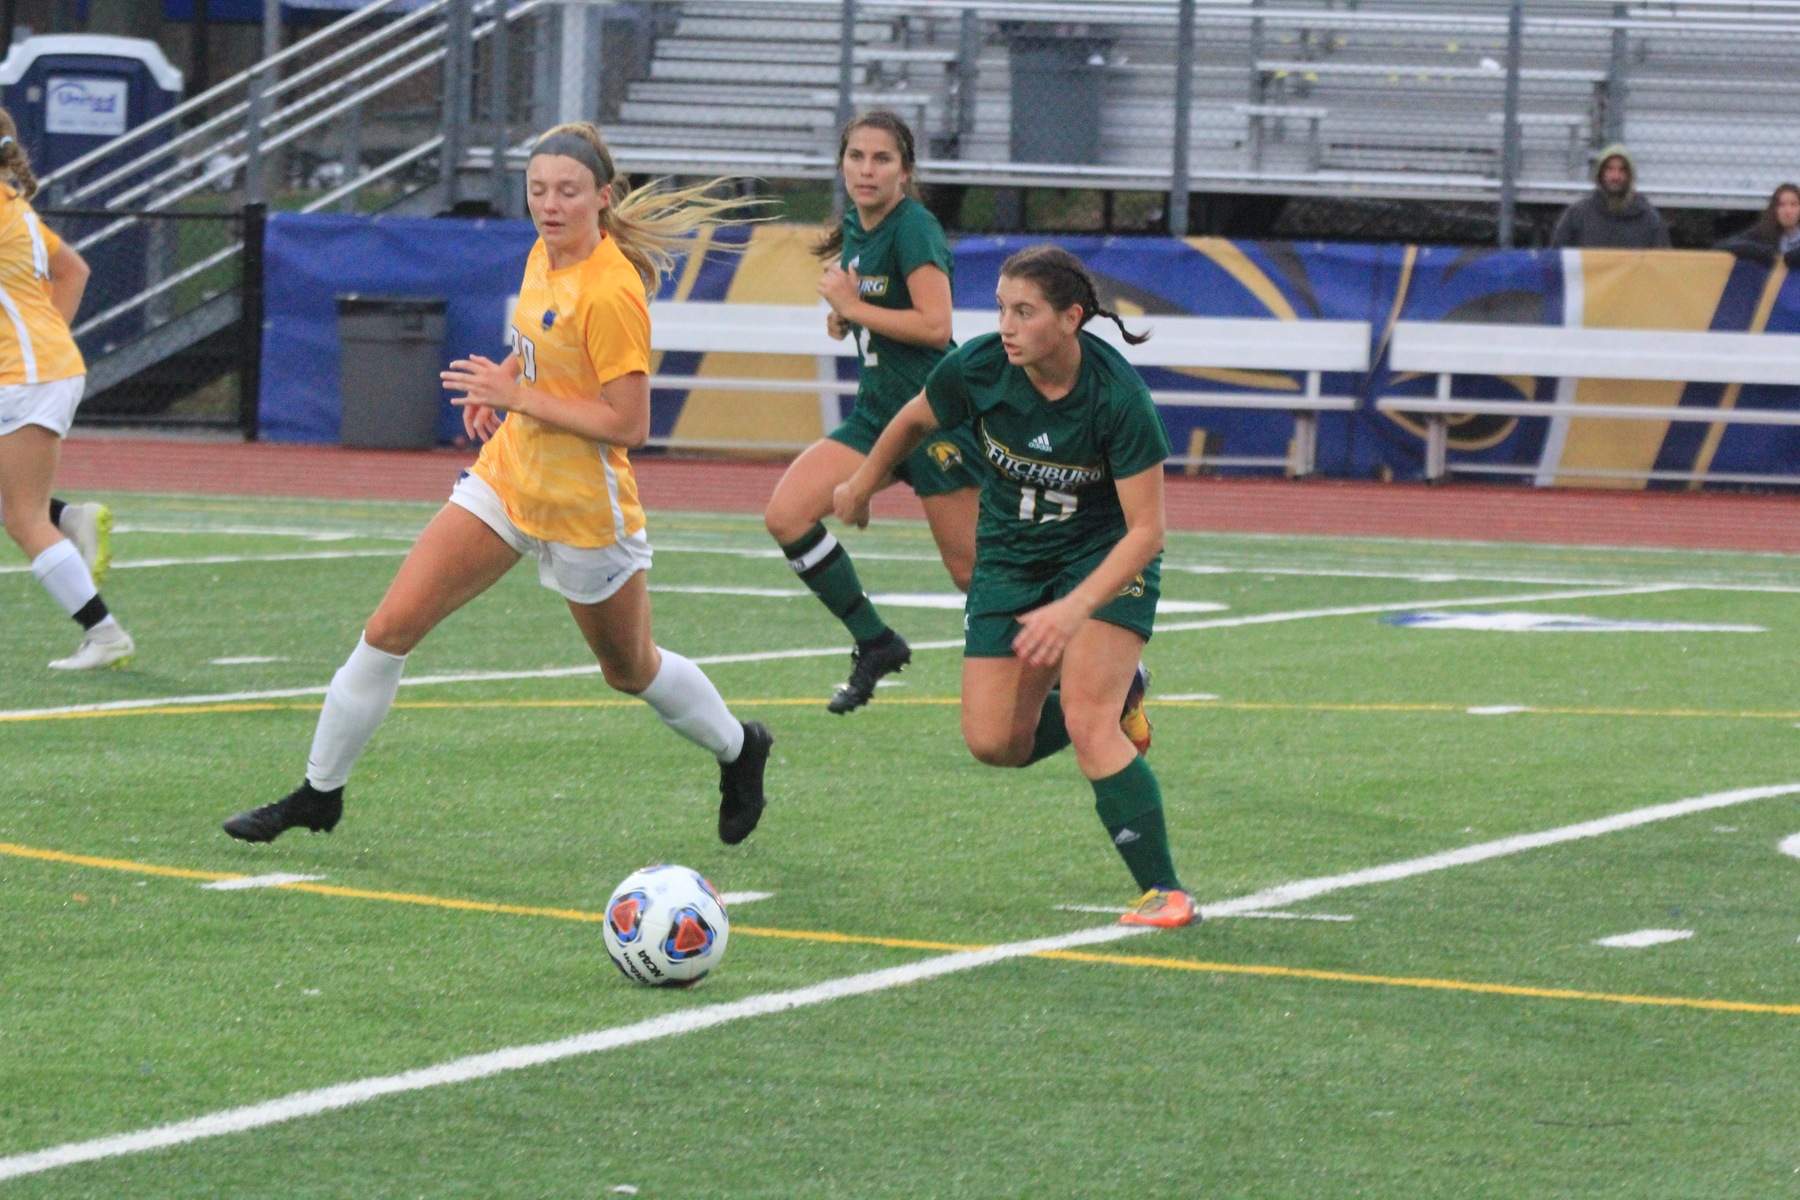 Falcons Fall To Lancers, 6-0 In MASCAC Quarterfinal Round Action